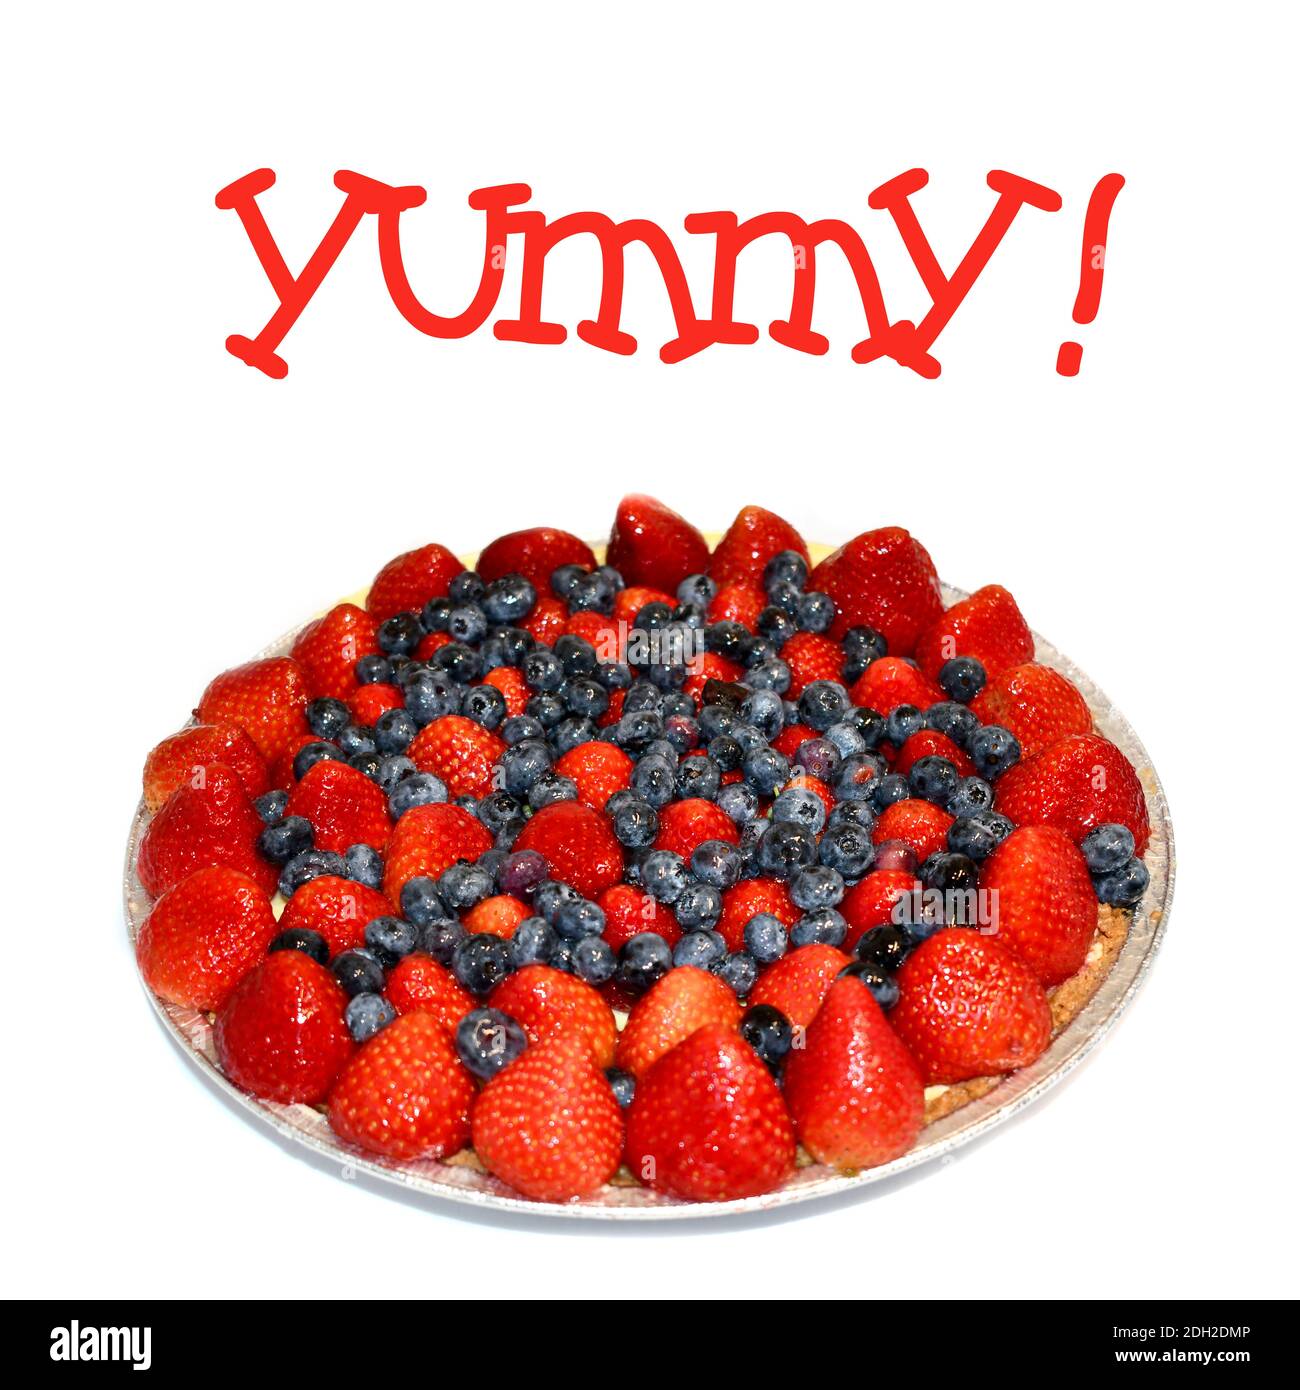 Red, white, and blue fruit tart with strawberries and blueberries Stock Photo